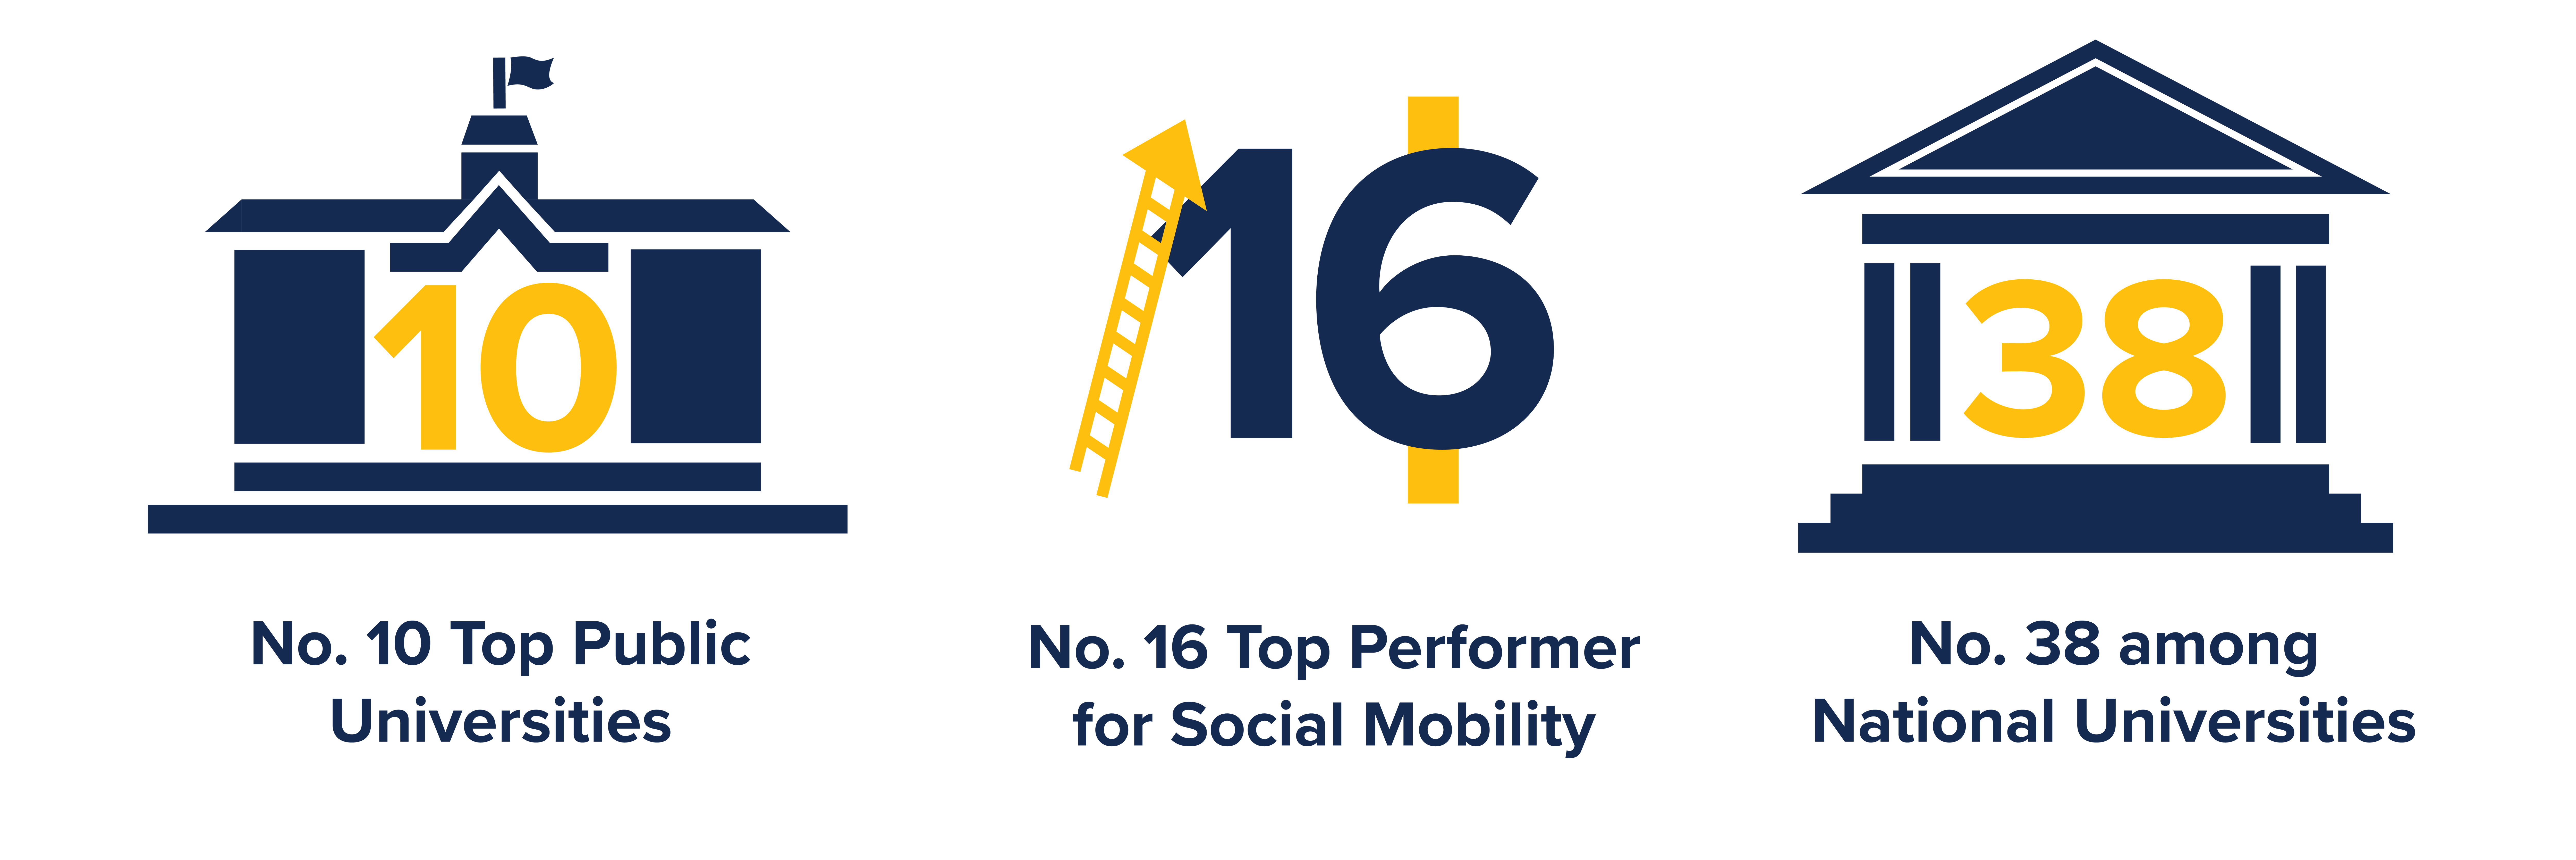 Number 10 for Top Public Universities, number 16 for social mobility, and number 38 among National Universities